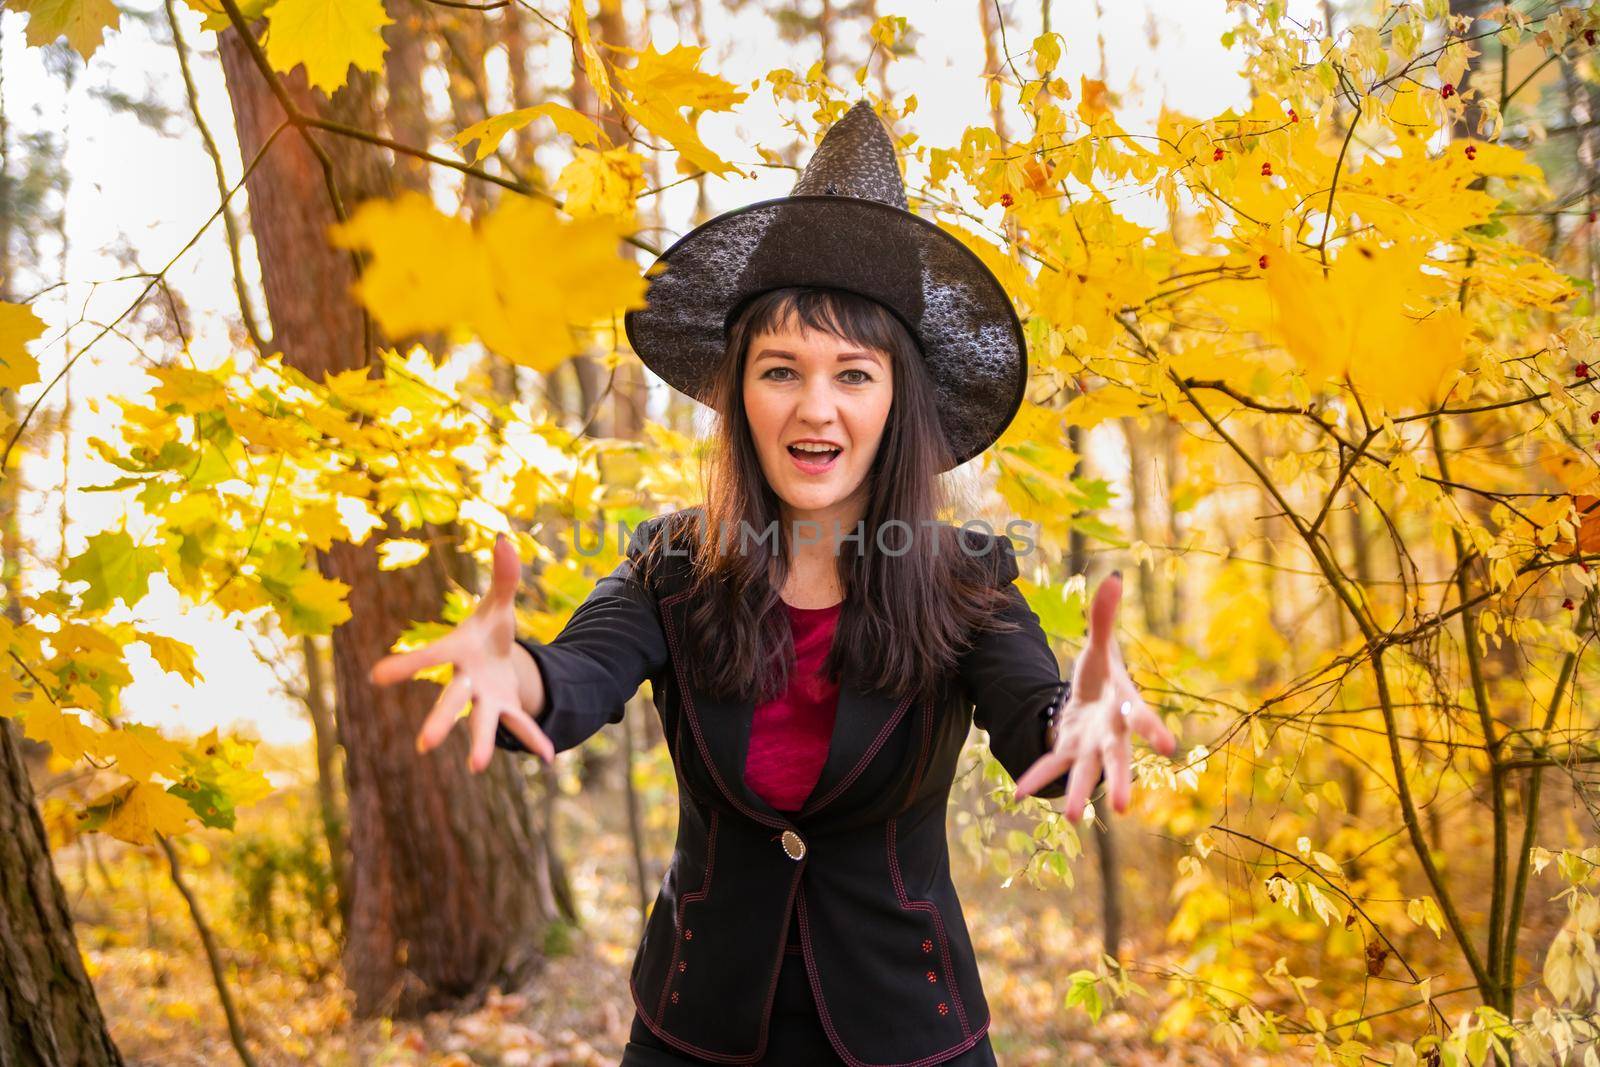 the witch making magic. woman in a witch costume laughs and throws leaves to the camera in the autumn forest. halloween celebration